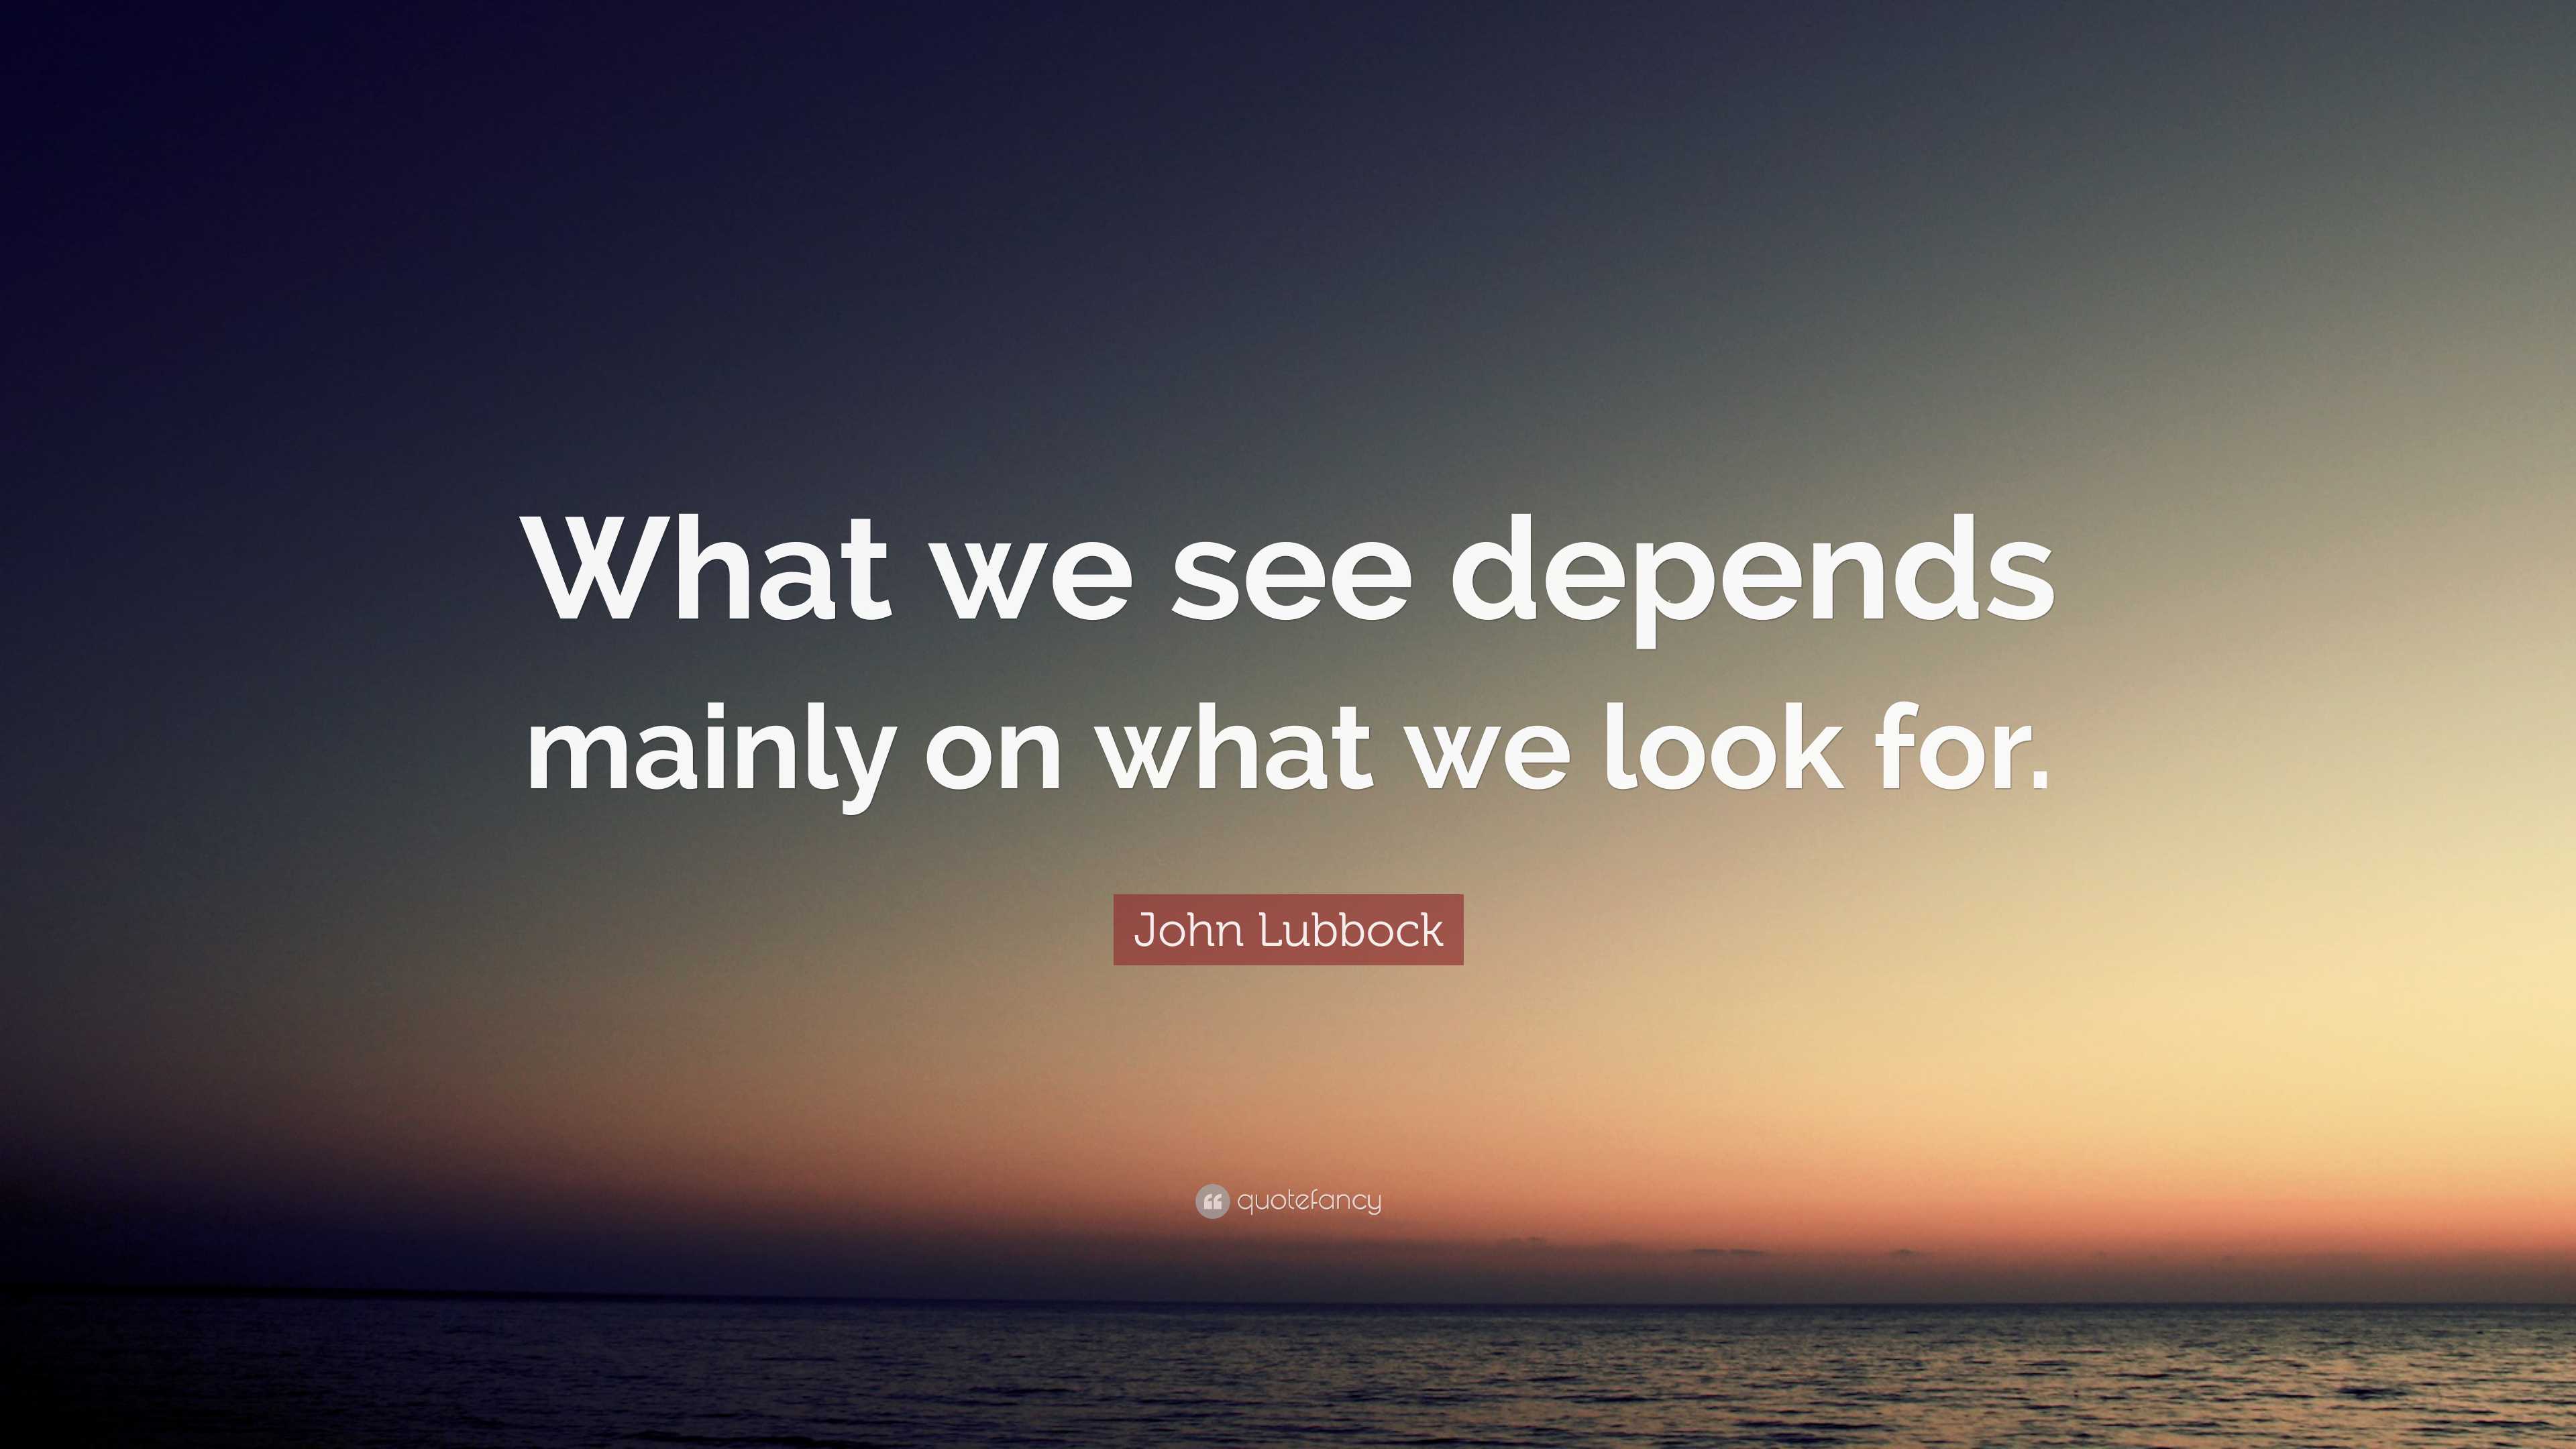 John Lubbock Quote: “What we see depends mainly on what we look for.”